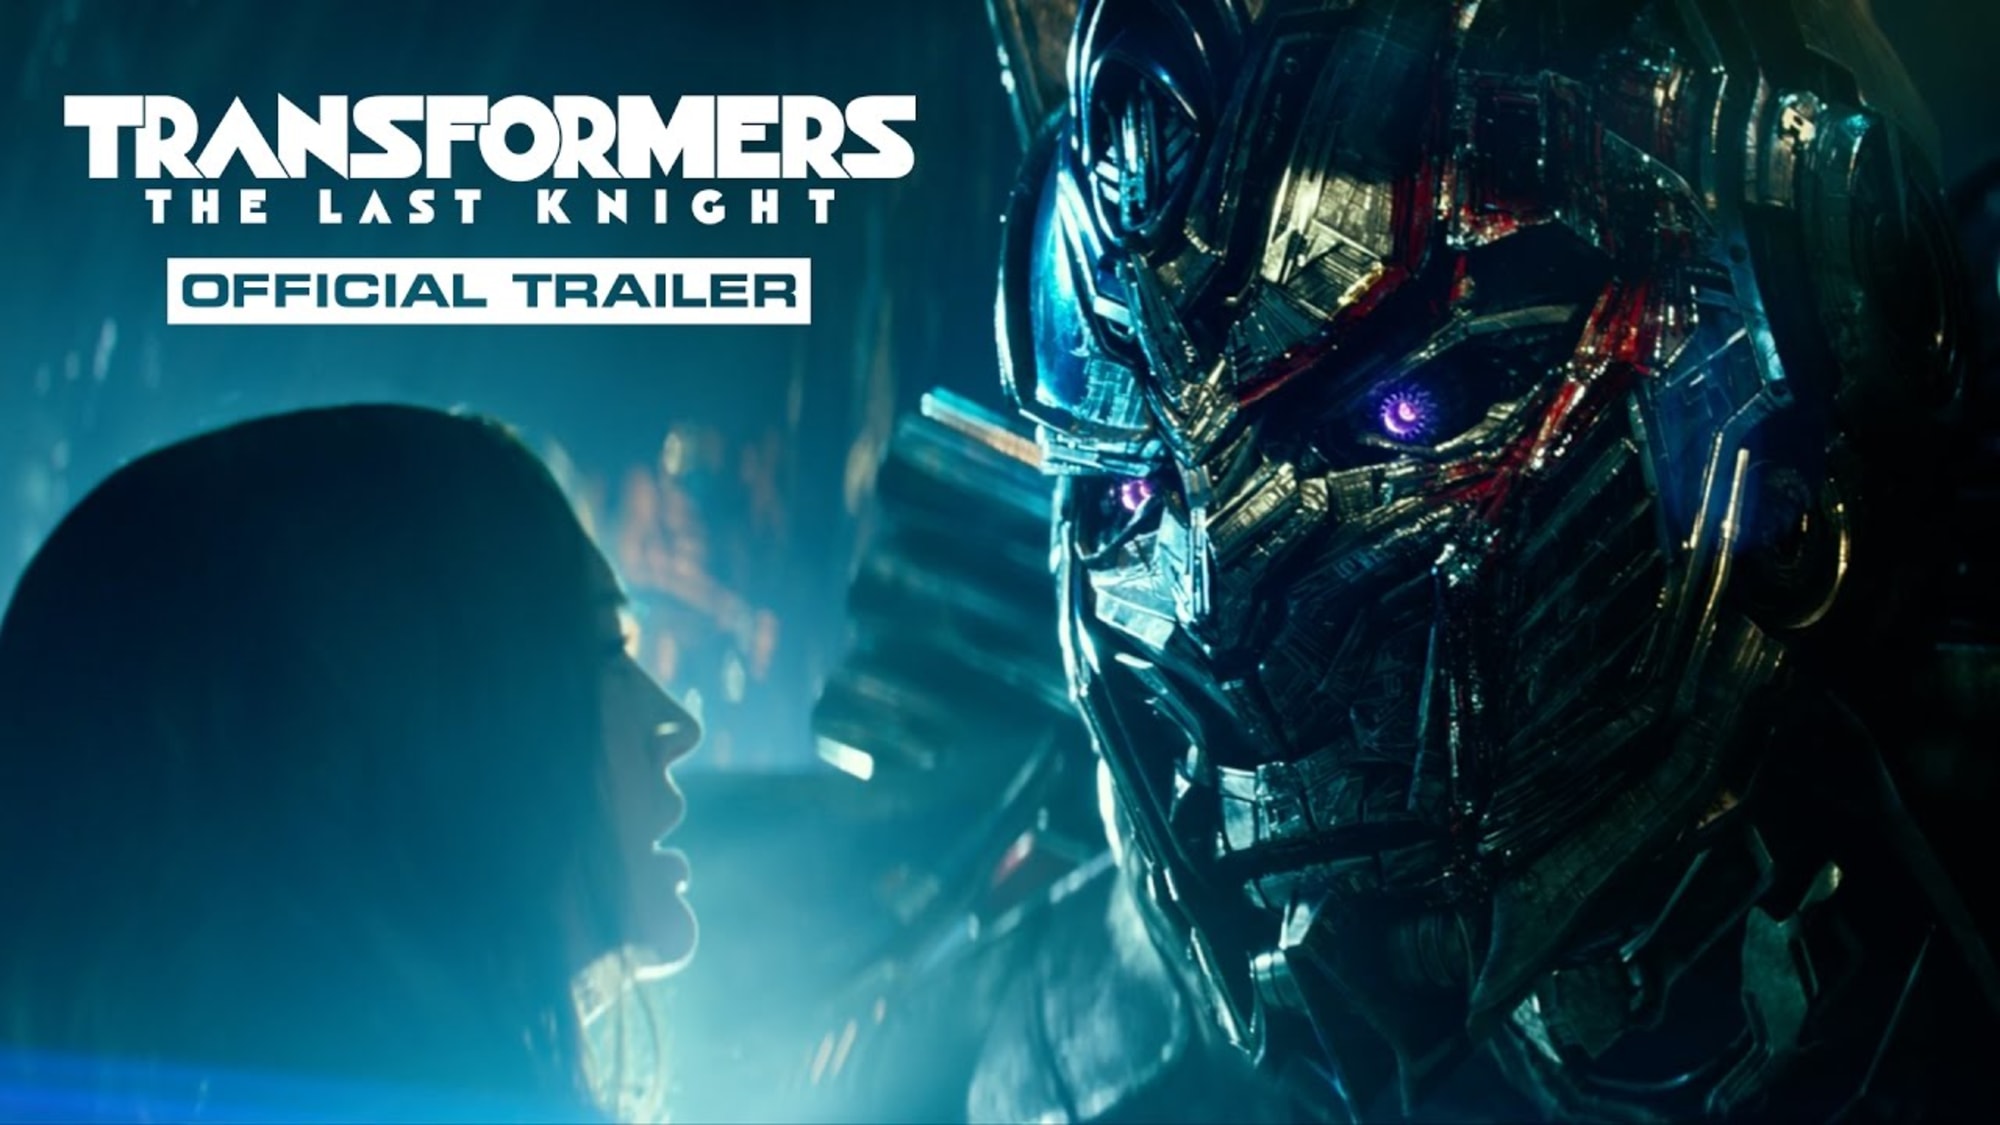 the newest transformers